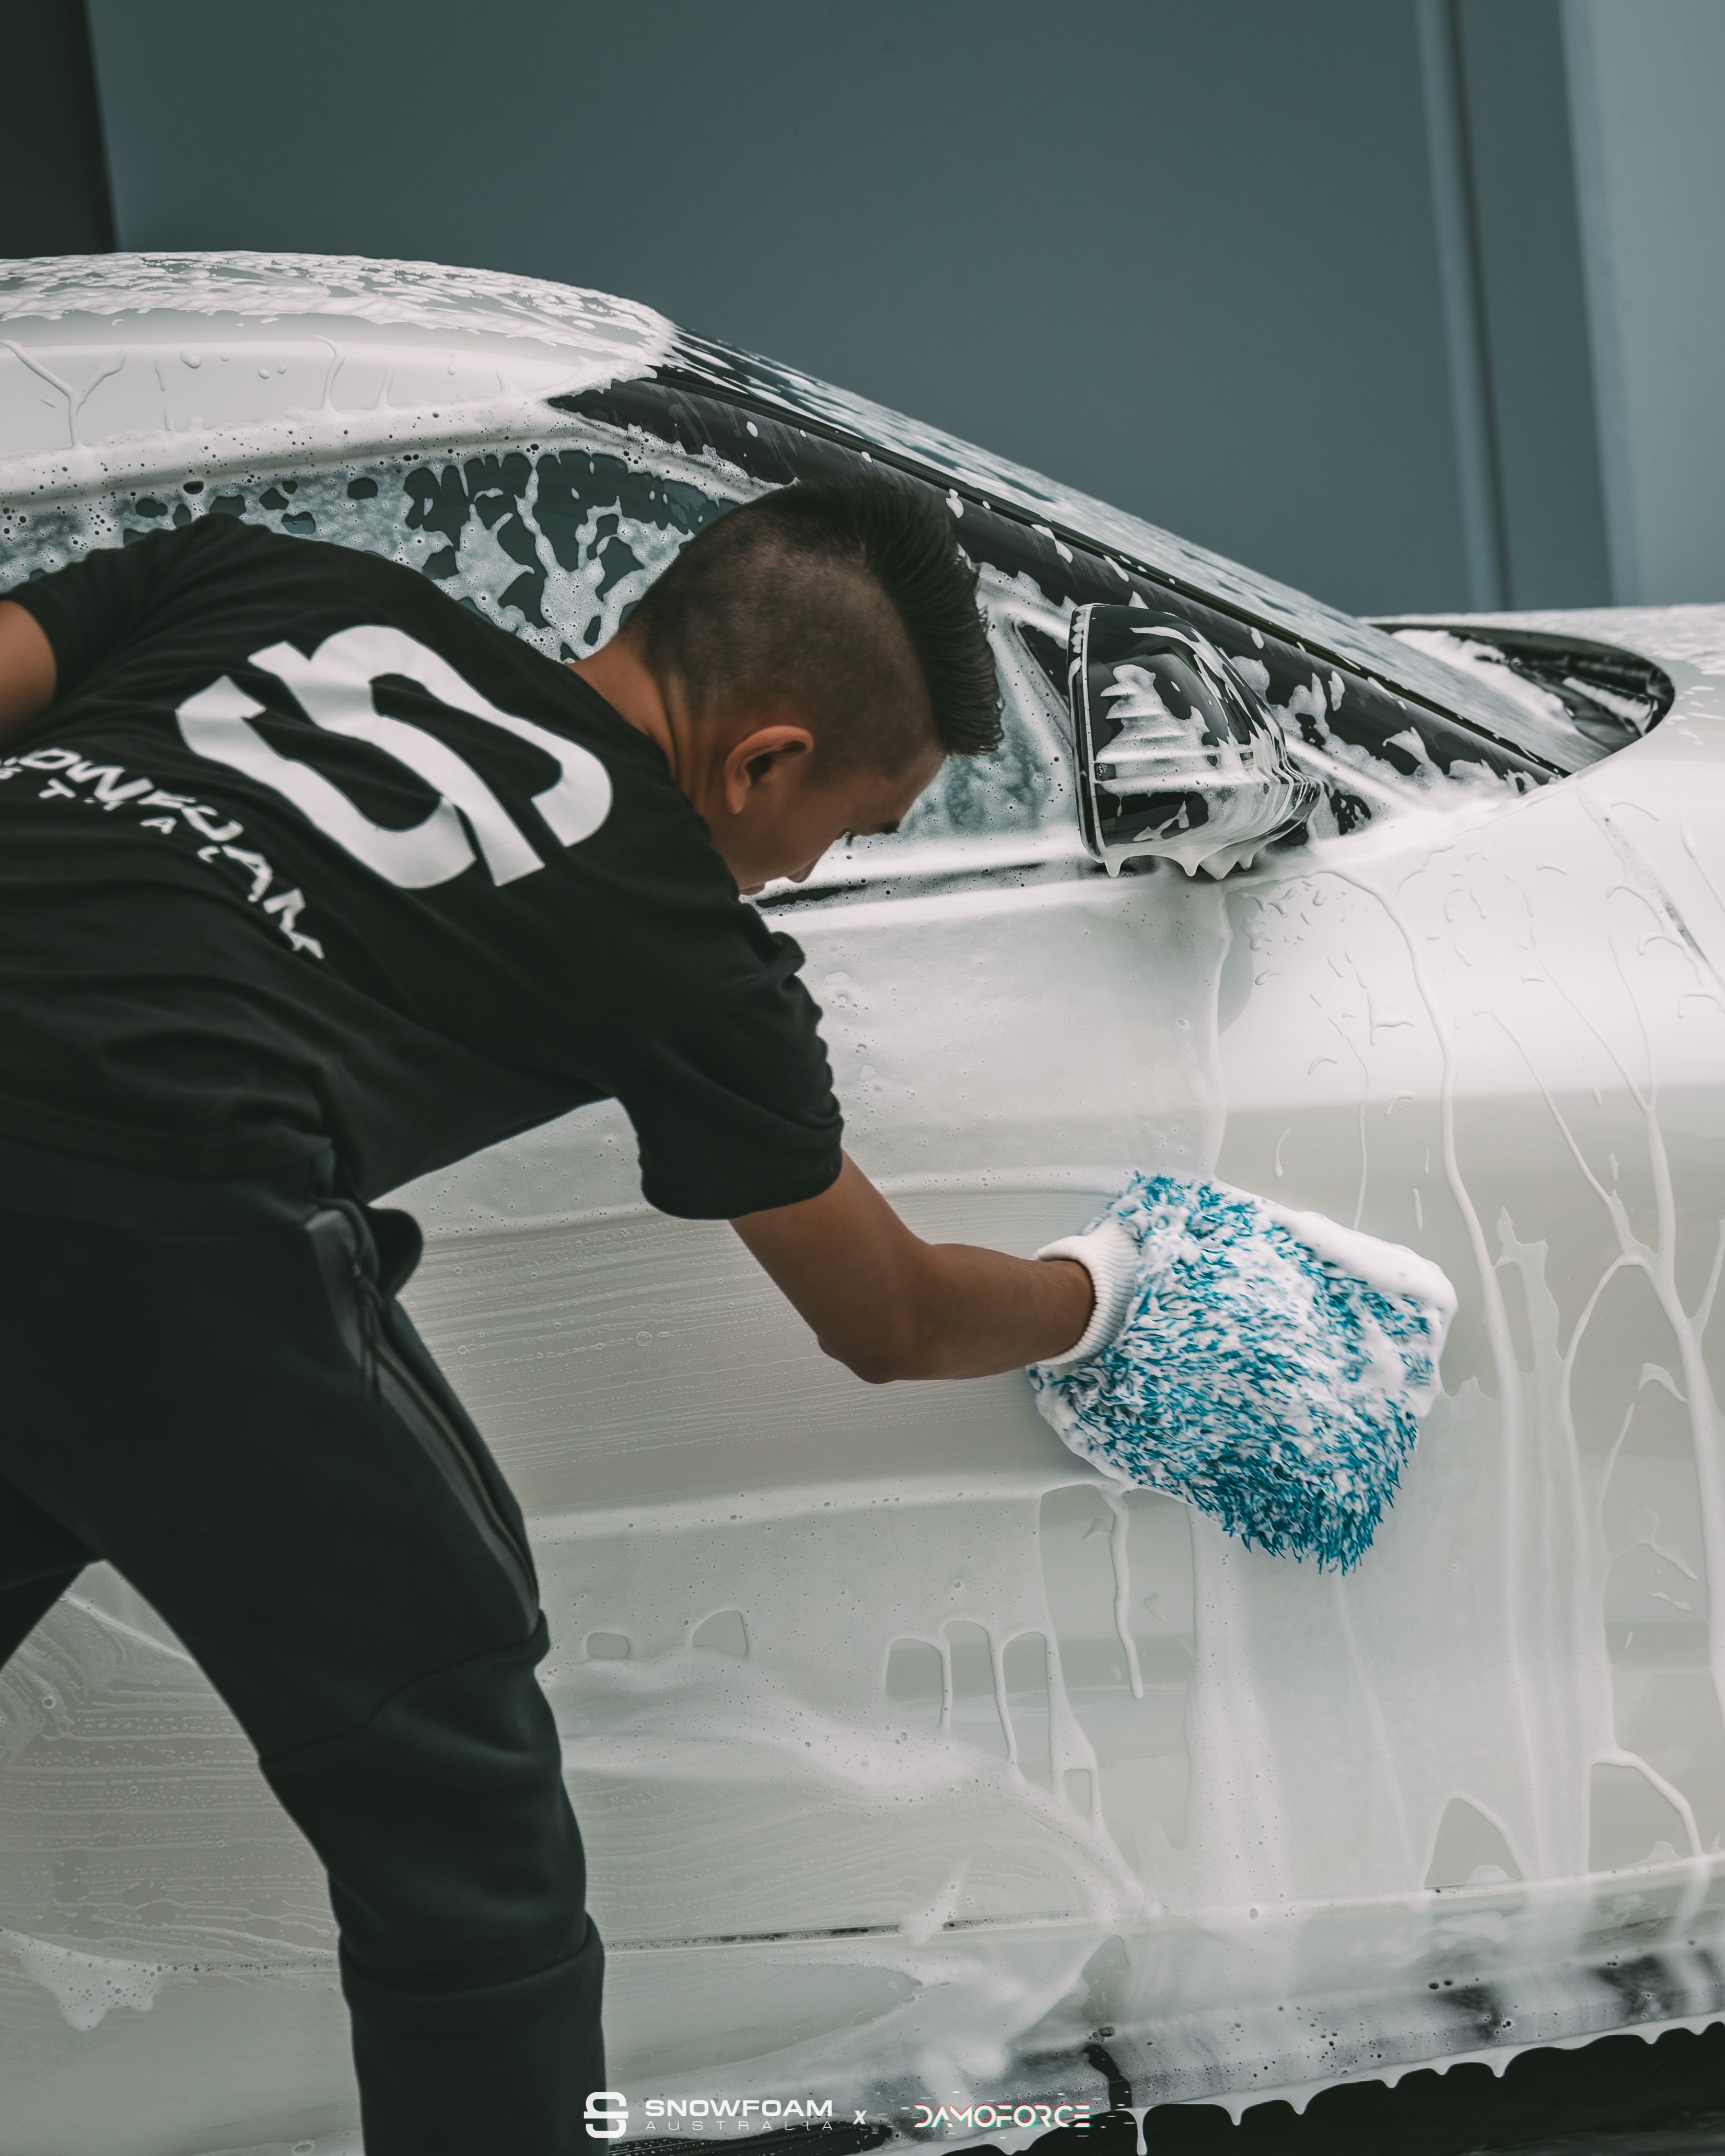 Top 5 Tips To Avoid Swirl Marks When Washing Your Car